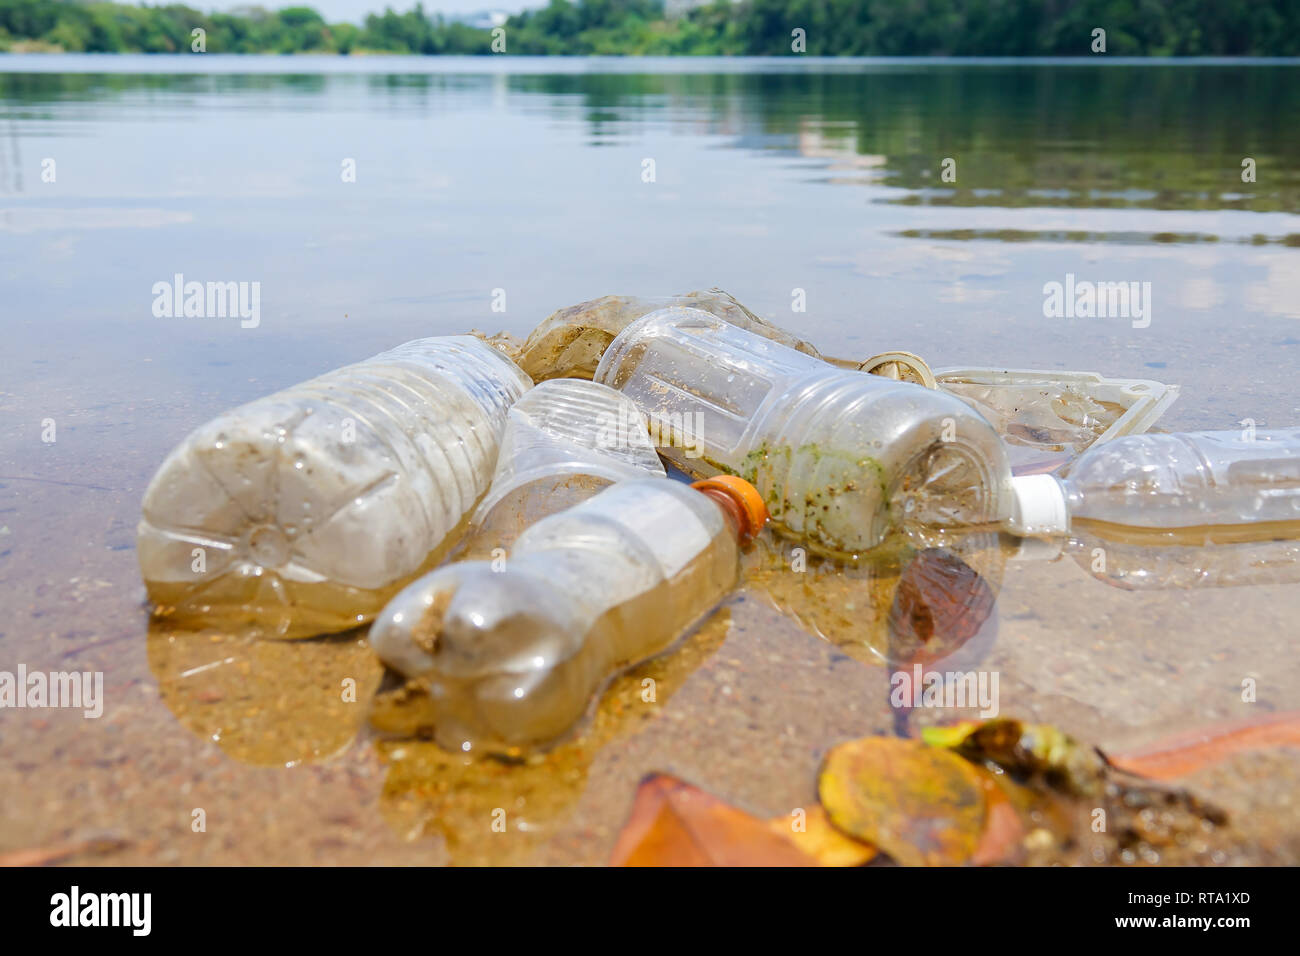 Bad enviromental habit of improper disposal of non-biodegradable PVC cups and bottles in a lake. Selective focus Stock Photo